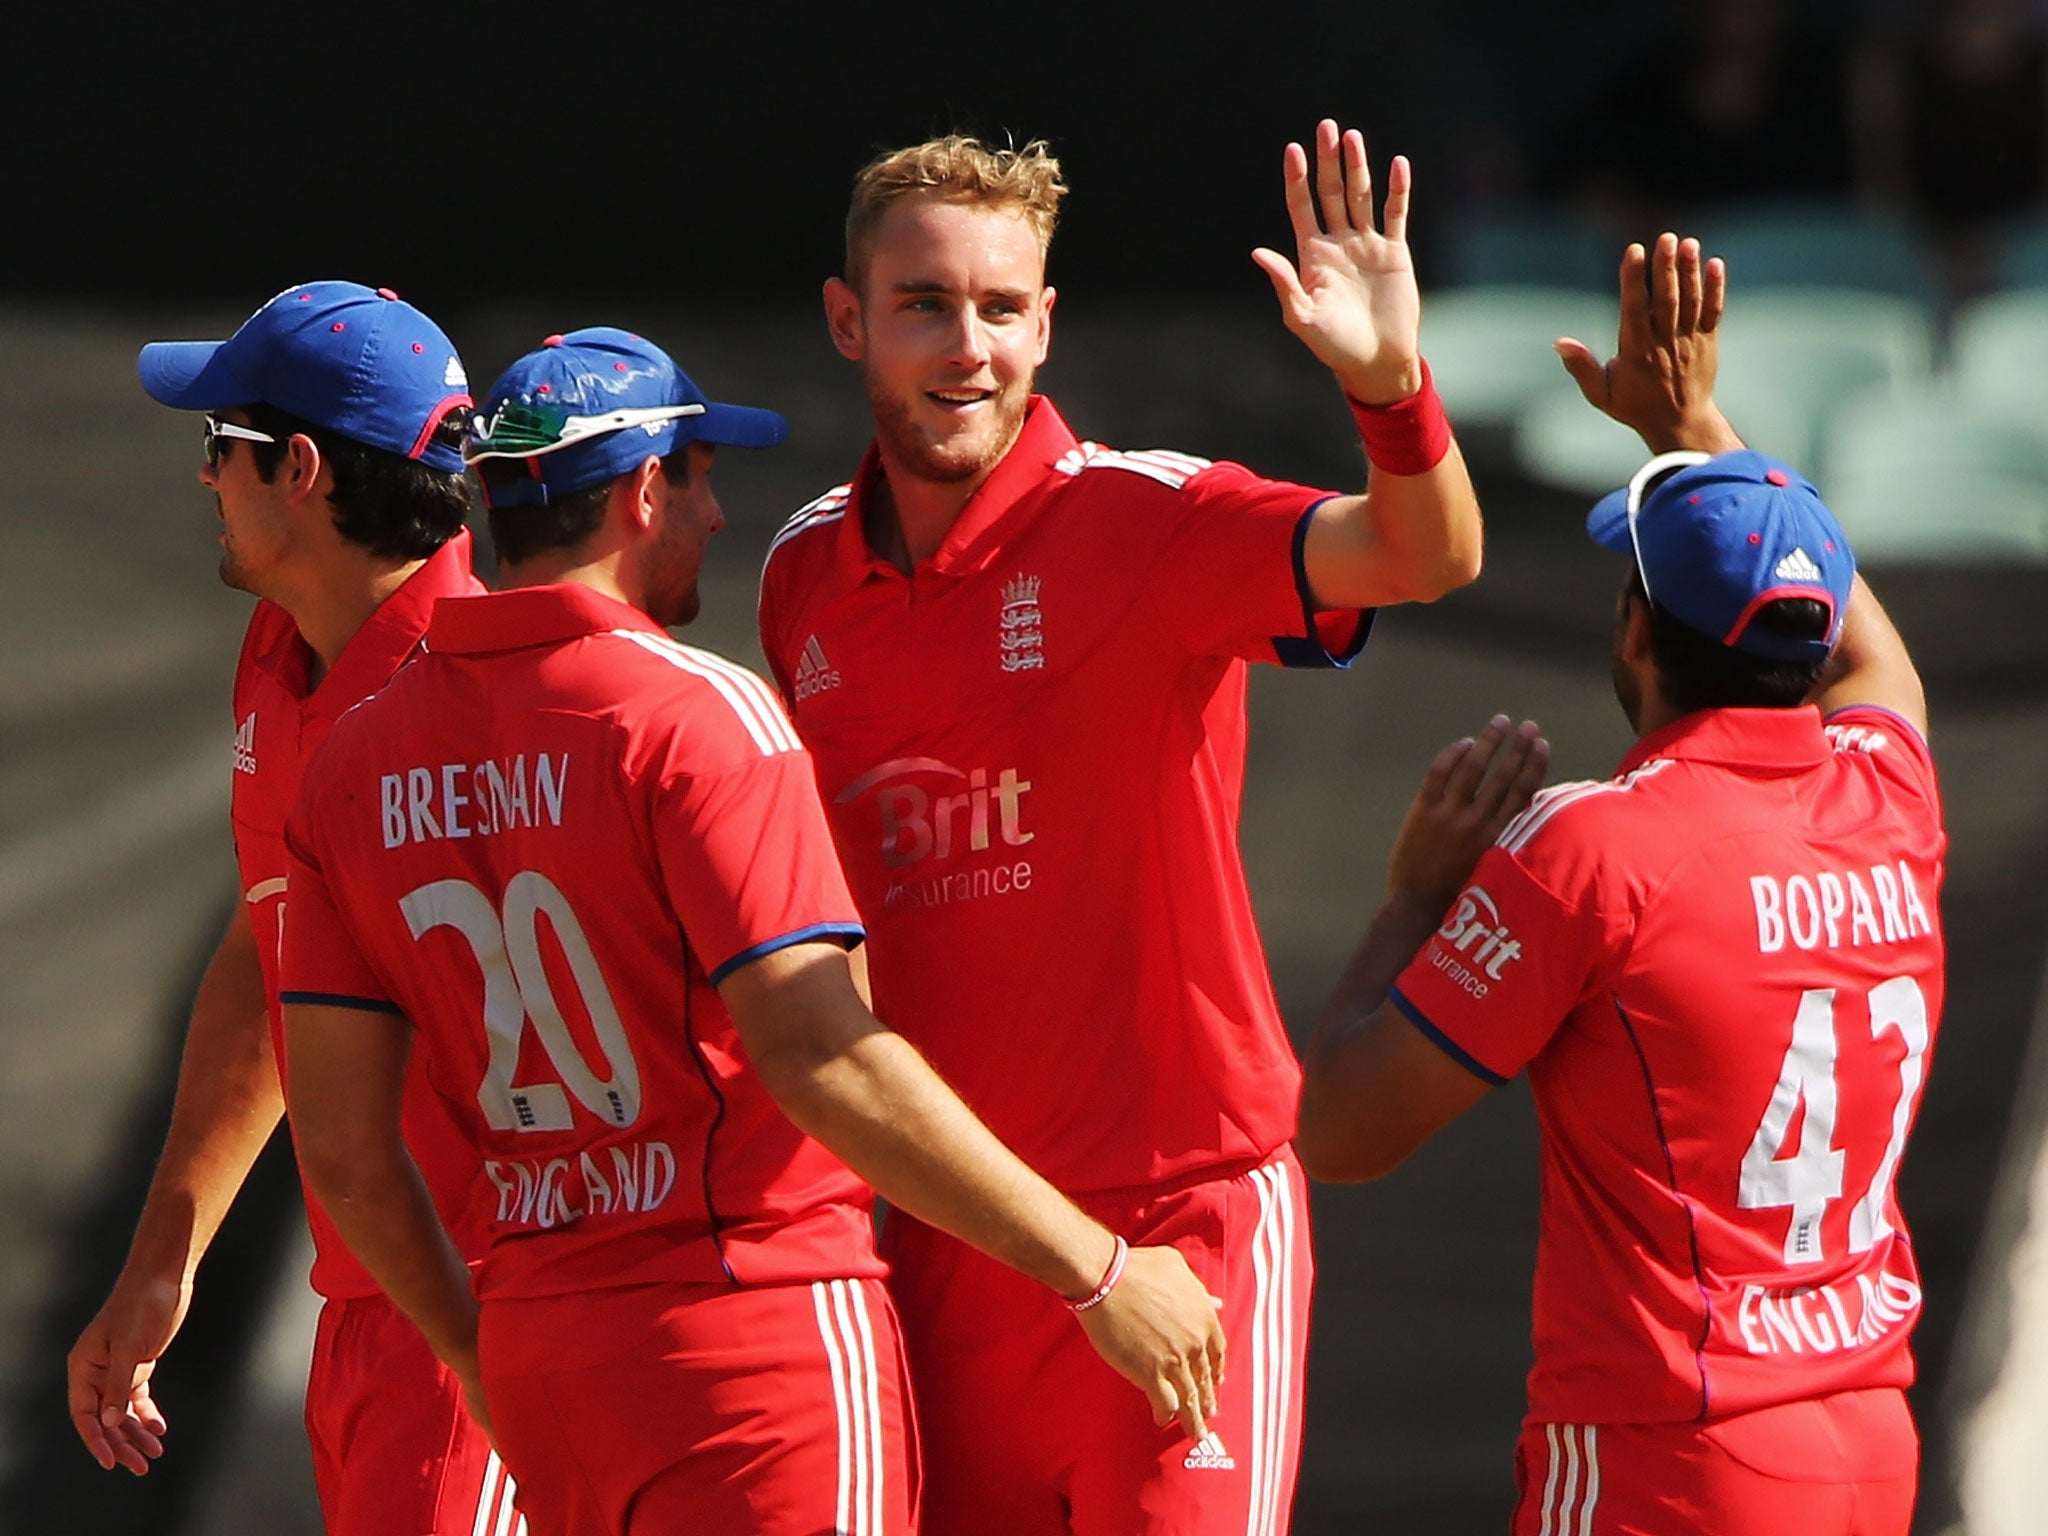 Stuart Broad is hoping for a strong finish to the tour of Australia with victory in the Twenty20 series